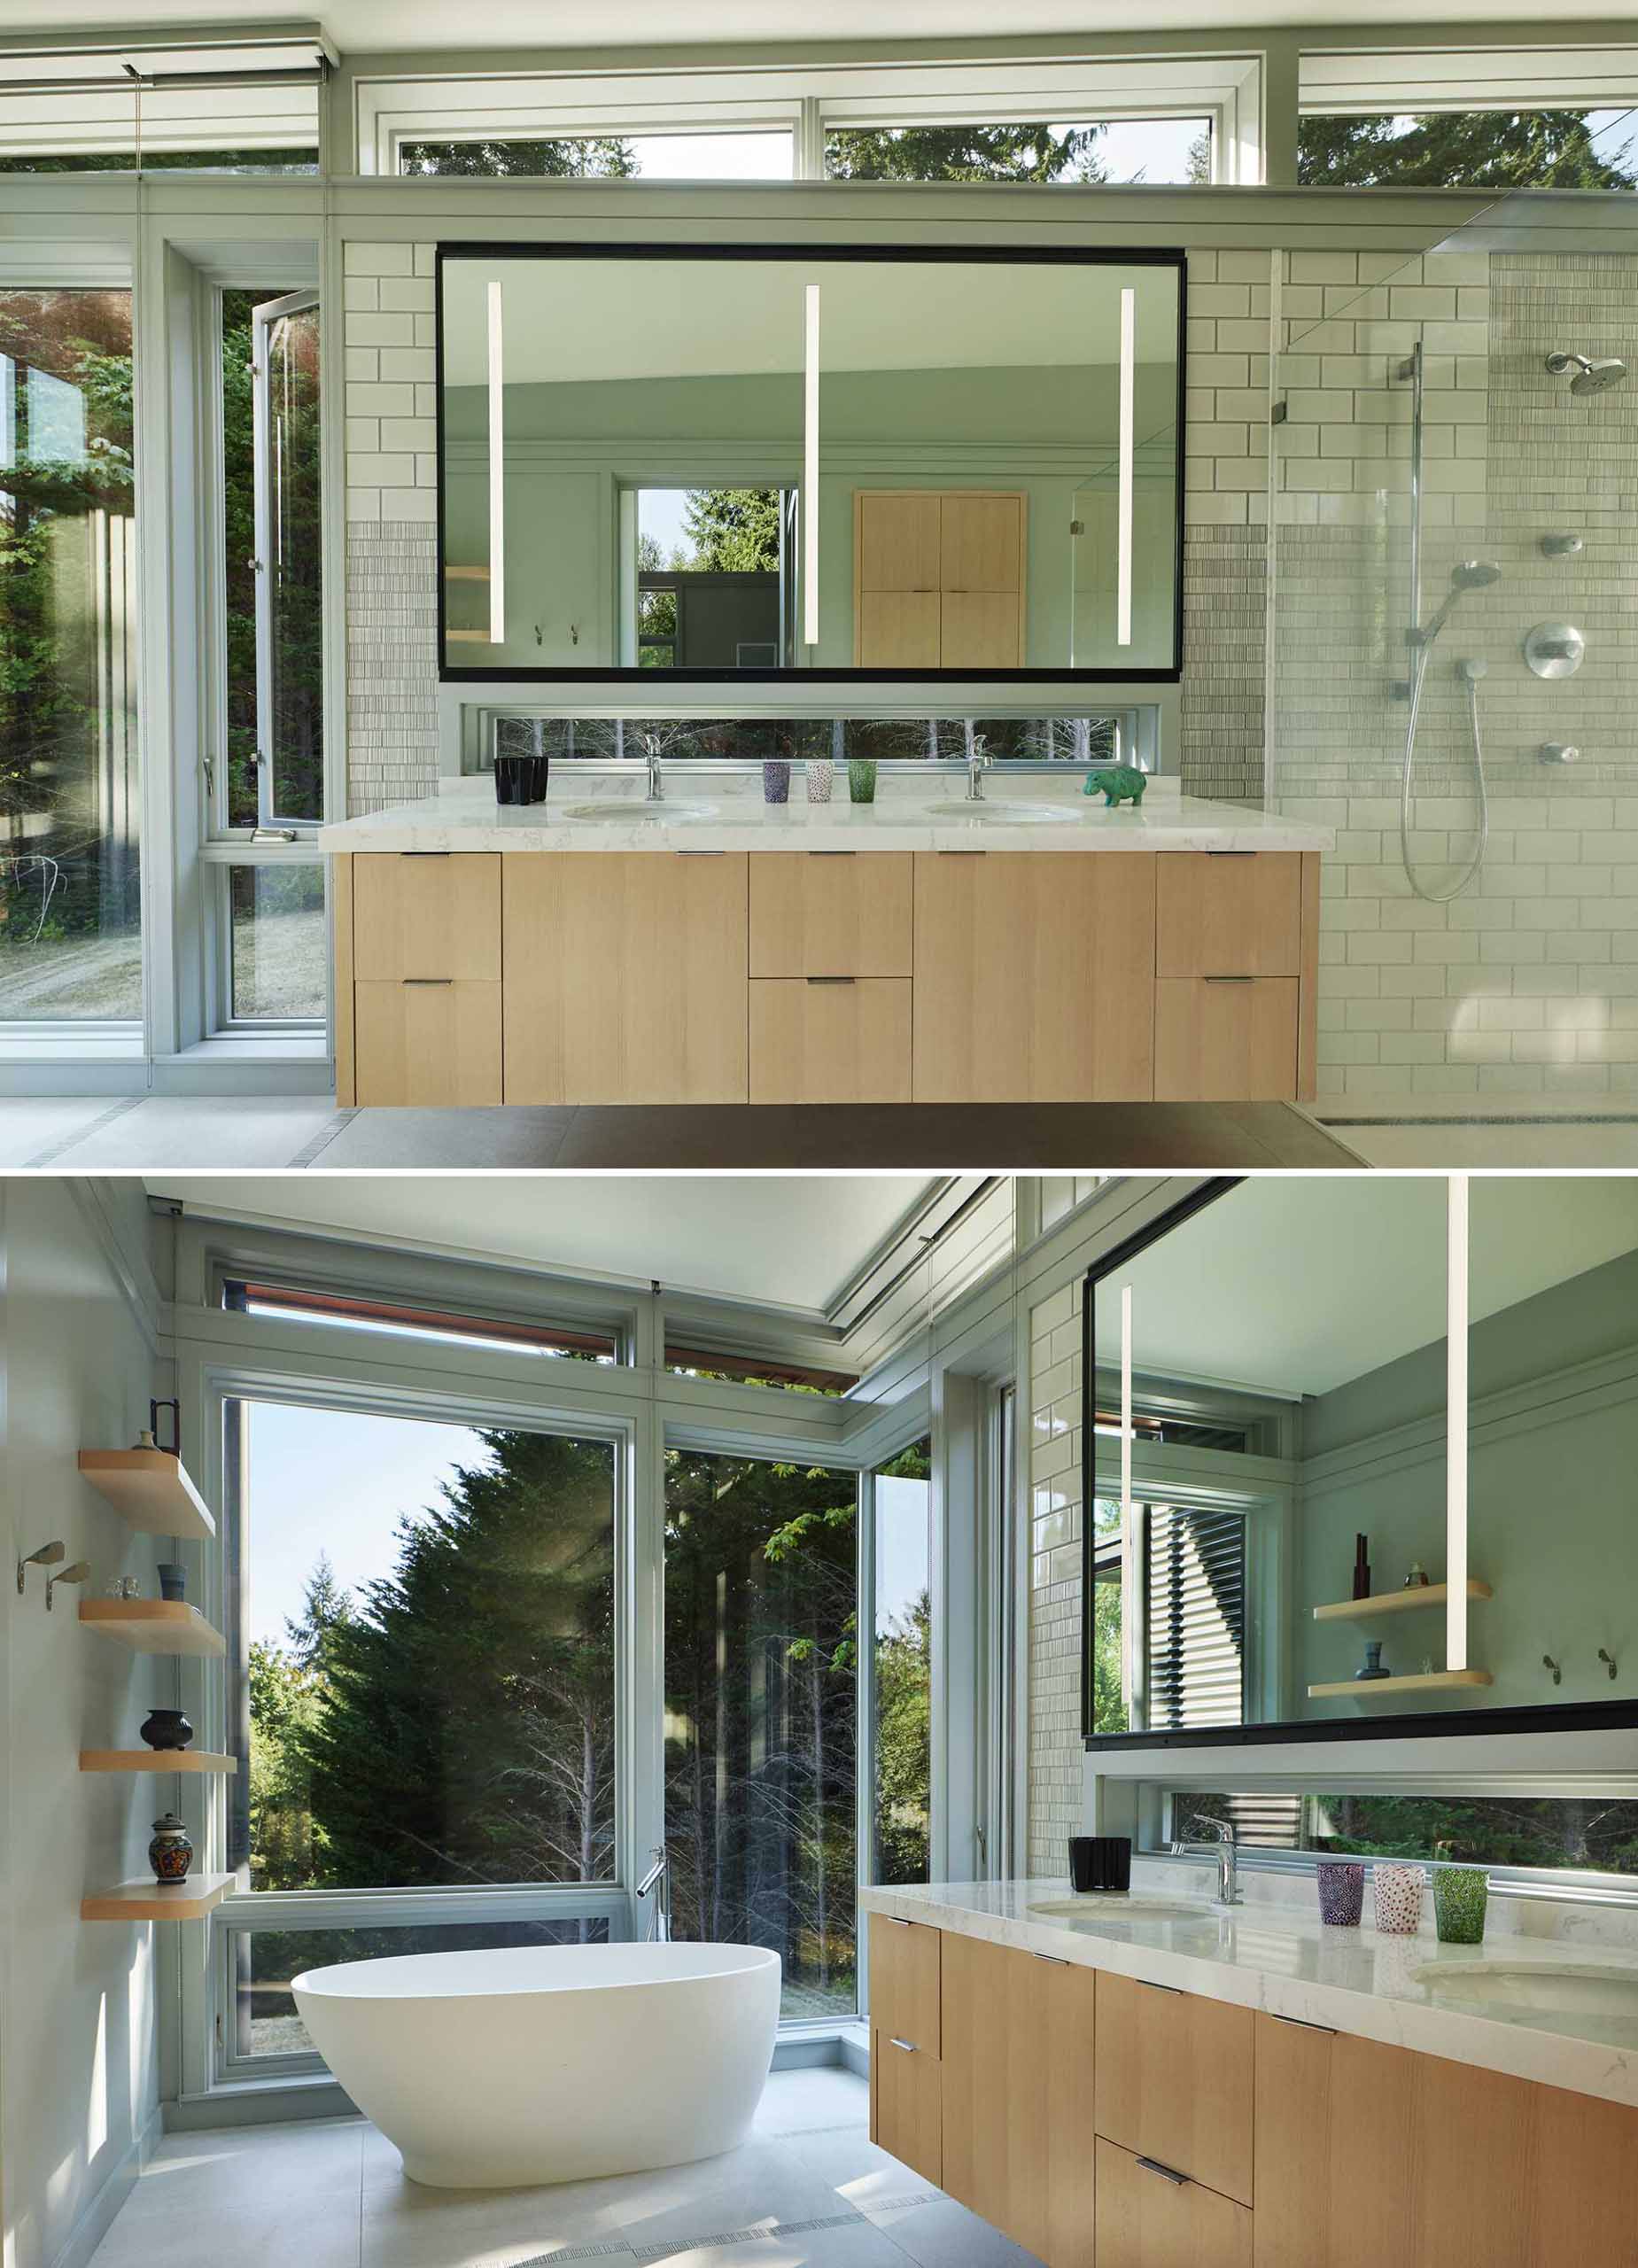 In this modern bathroom, clerestory windows wrap around the room, while the s،wer is located to the right of the vanity, and the bathtub has been positioned by the floor-to-ceiling windows.